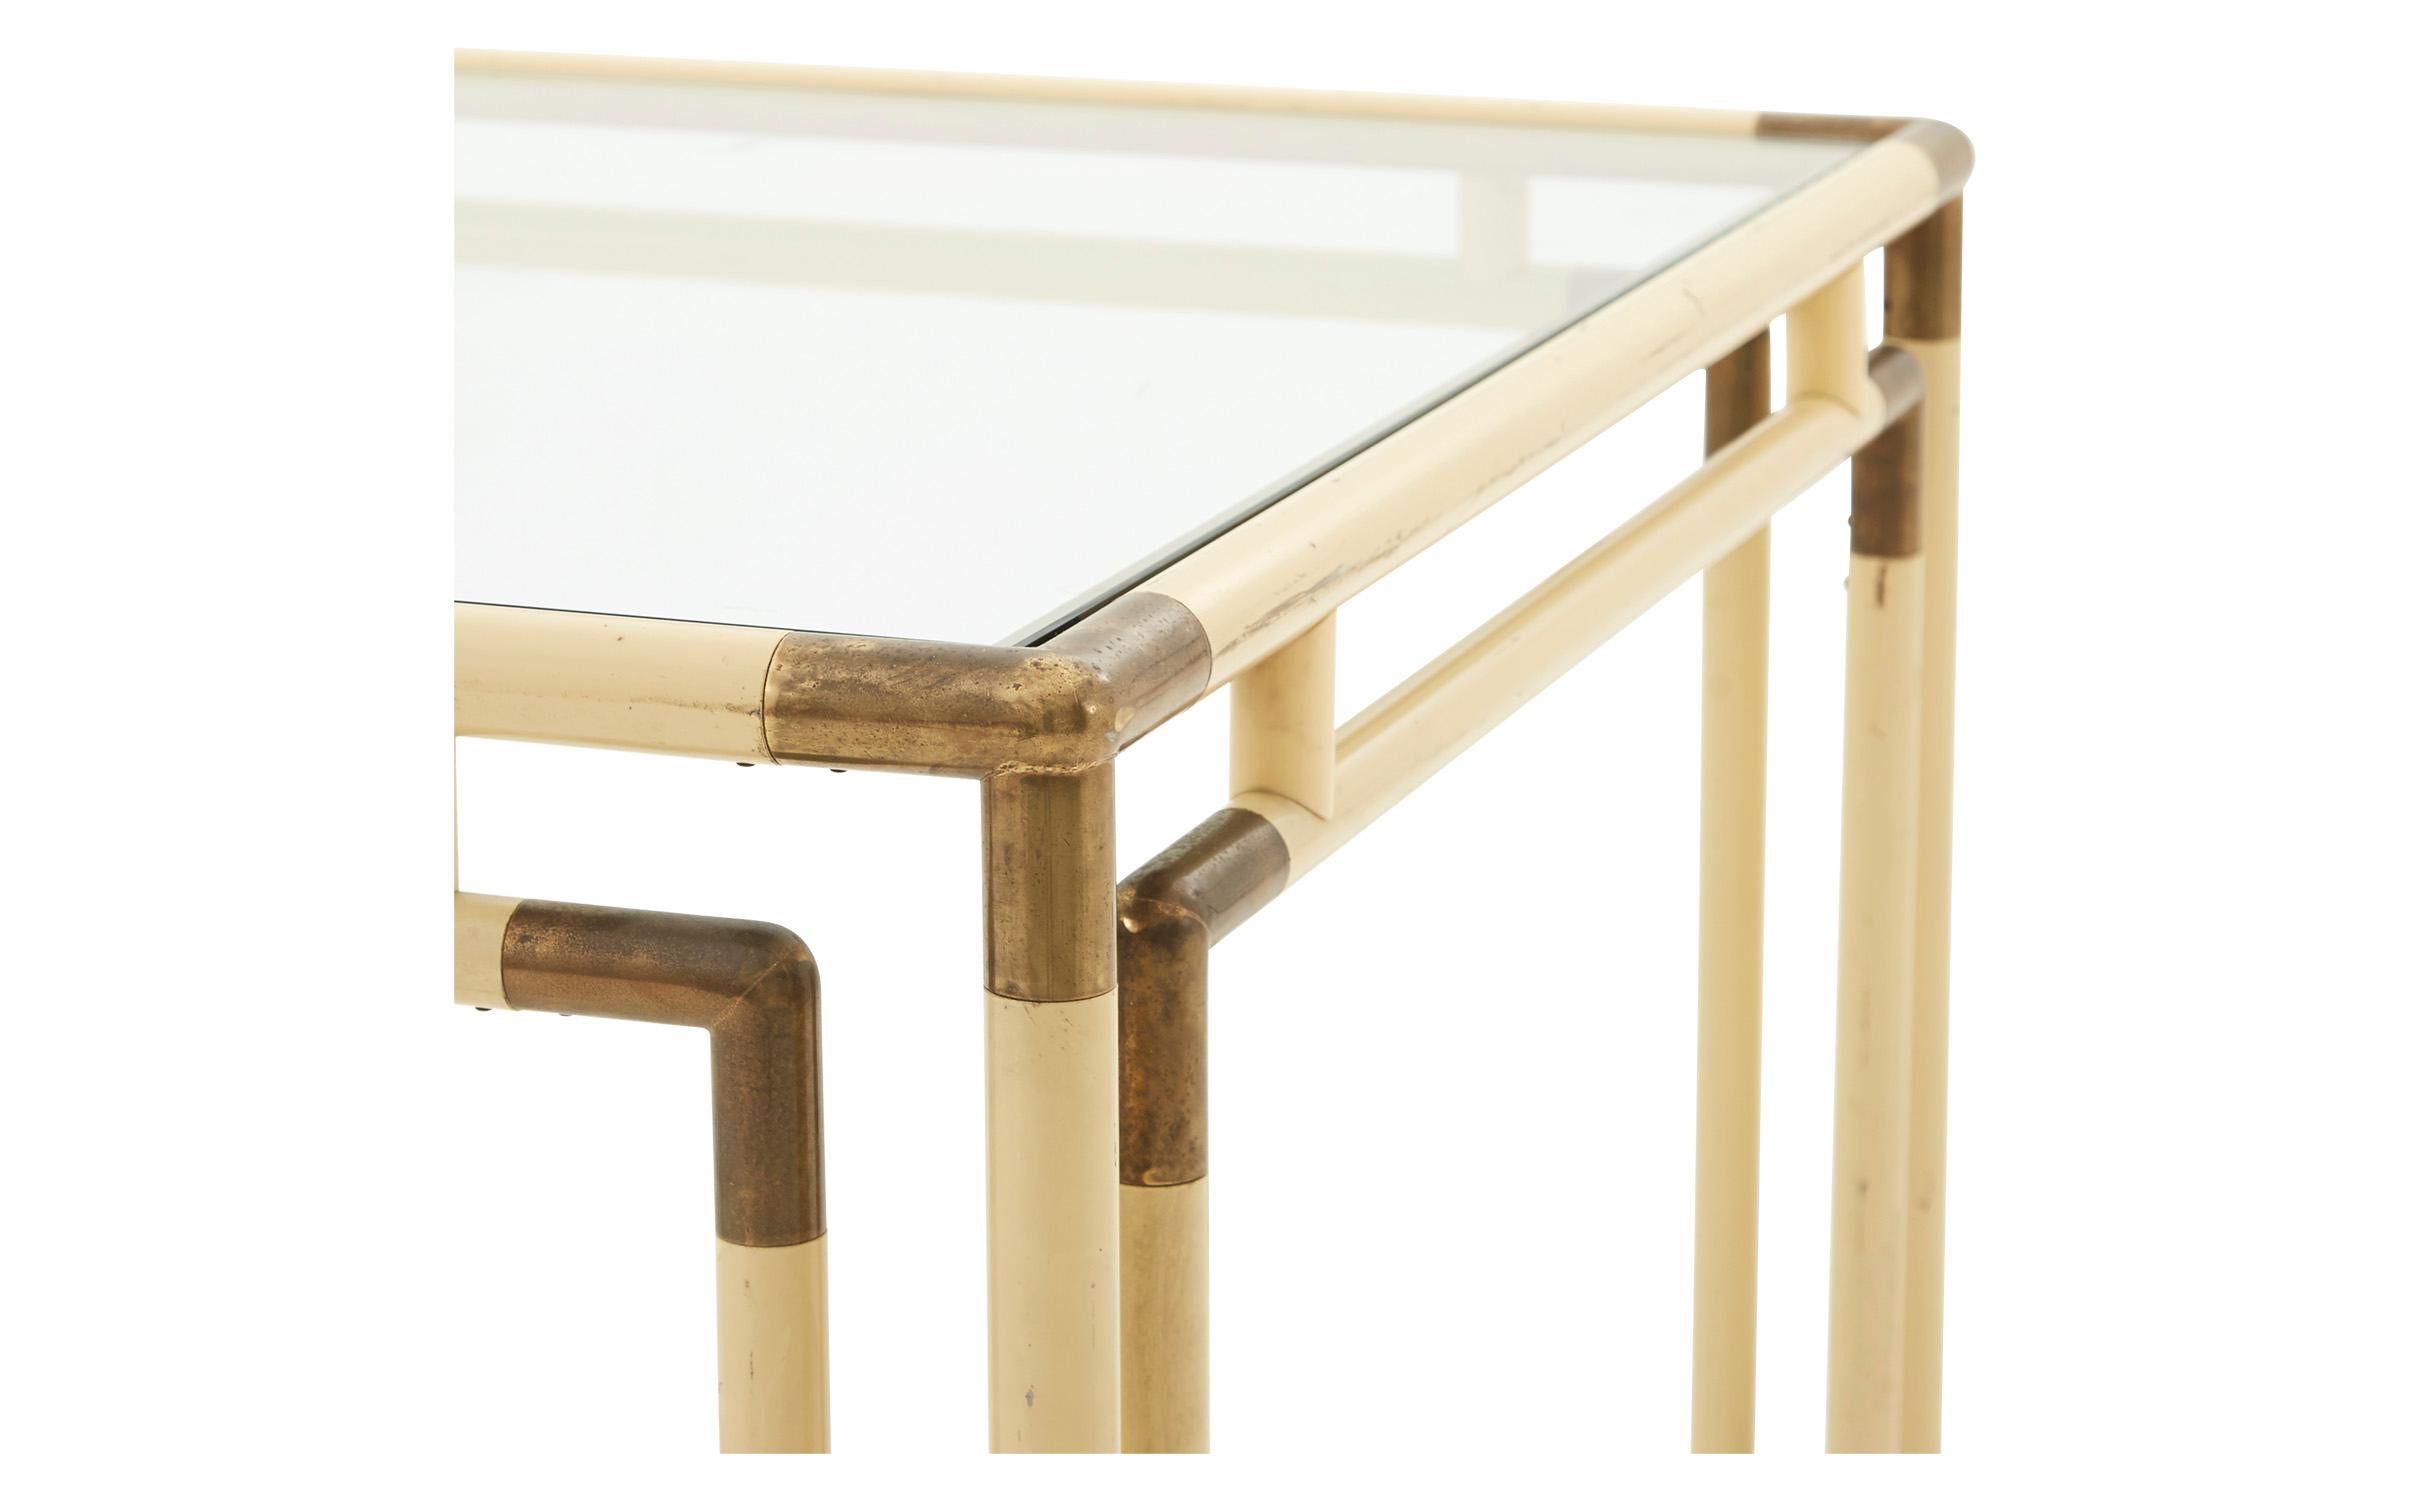 Spanish Cream and Brass Metal Dining Table with Glass Top